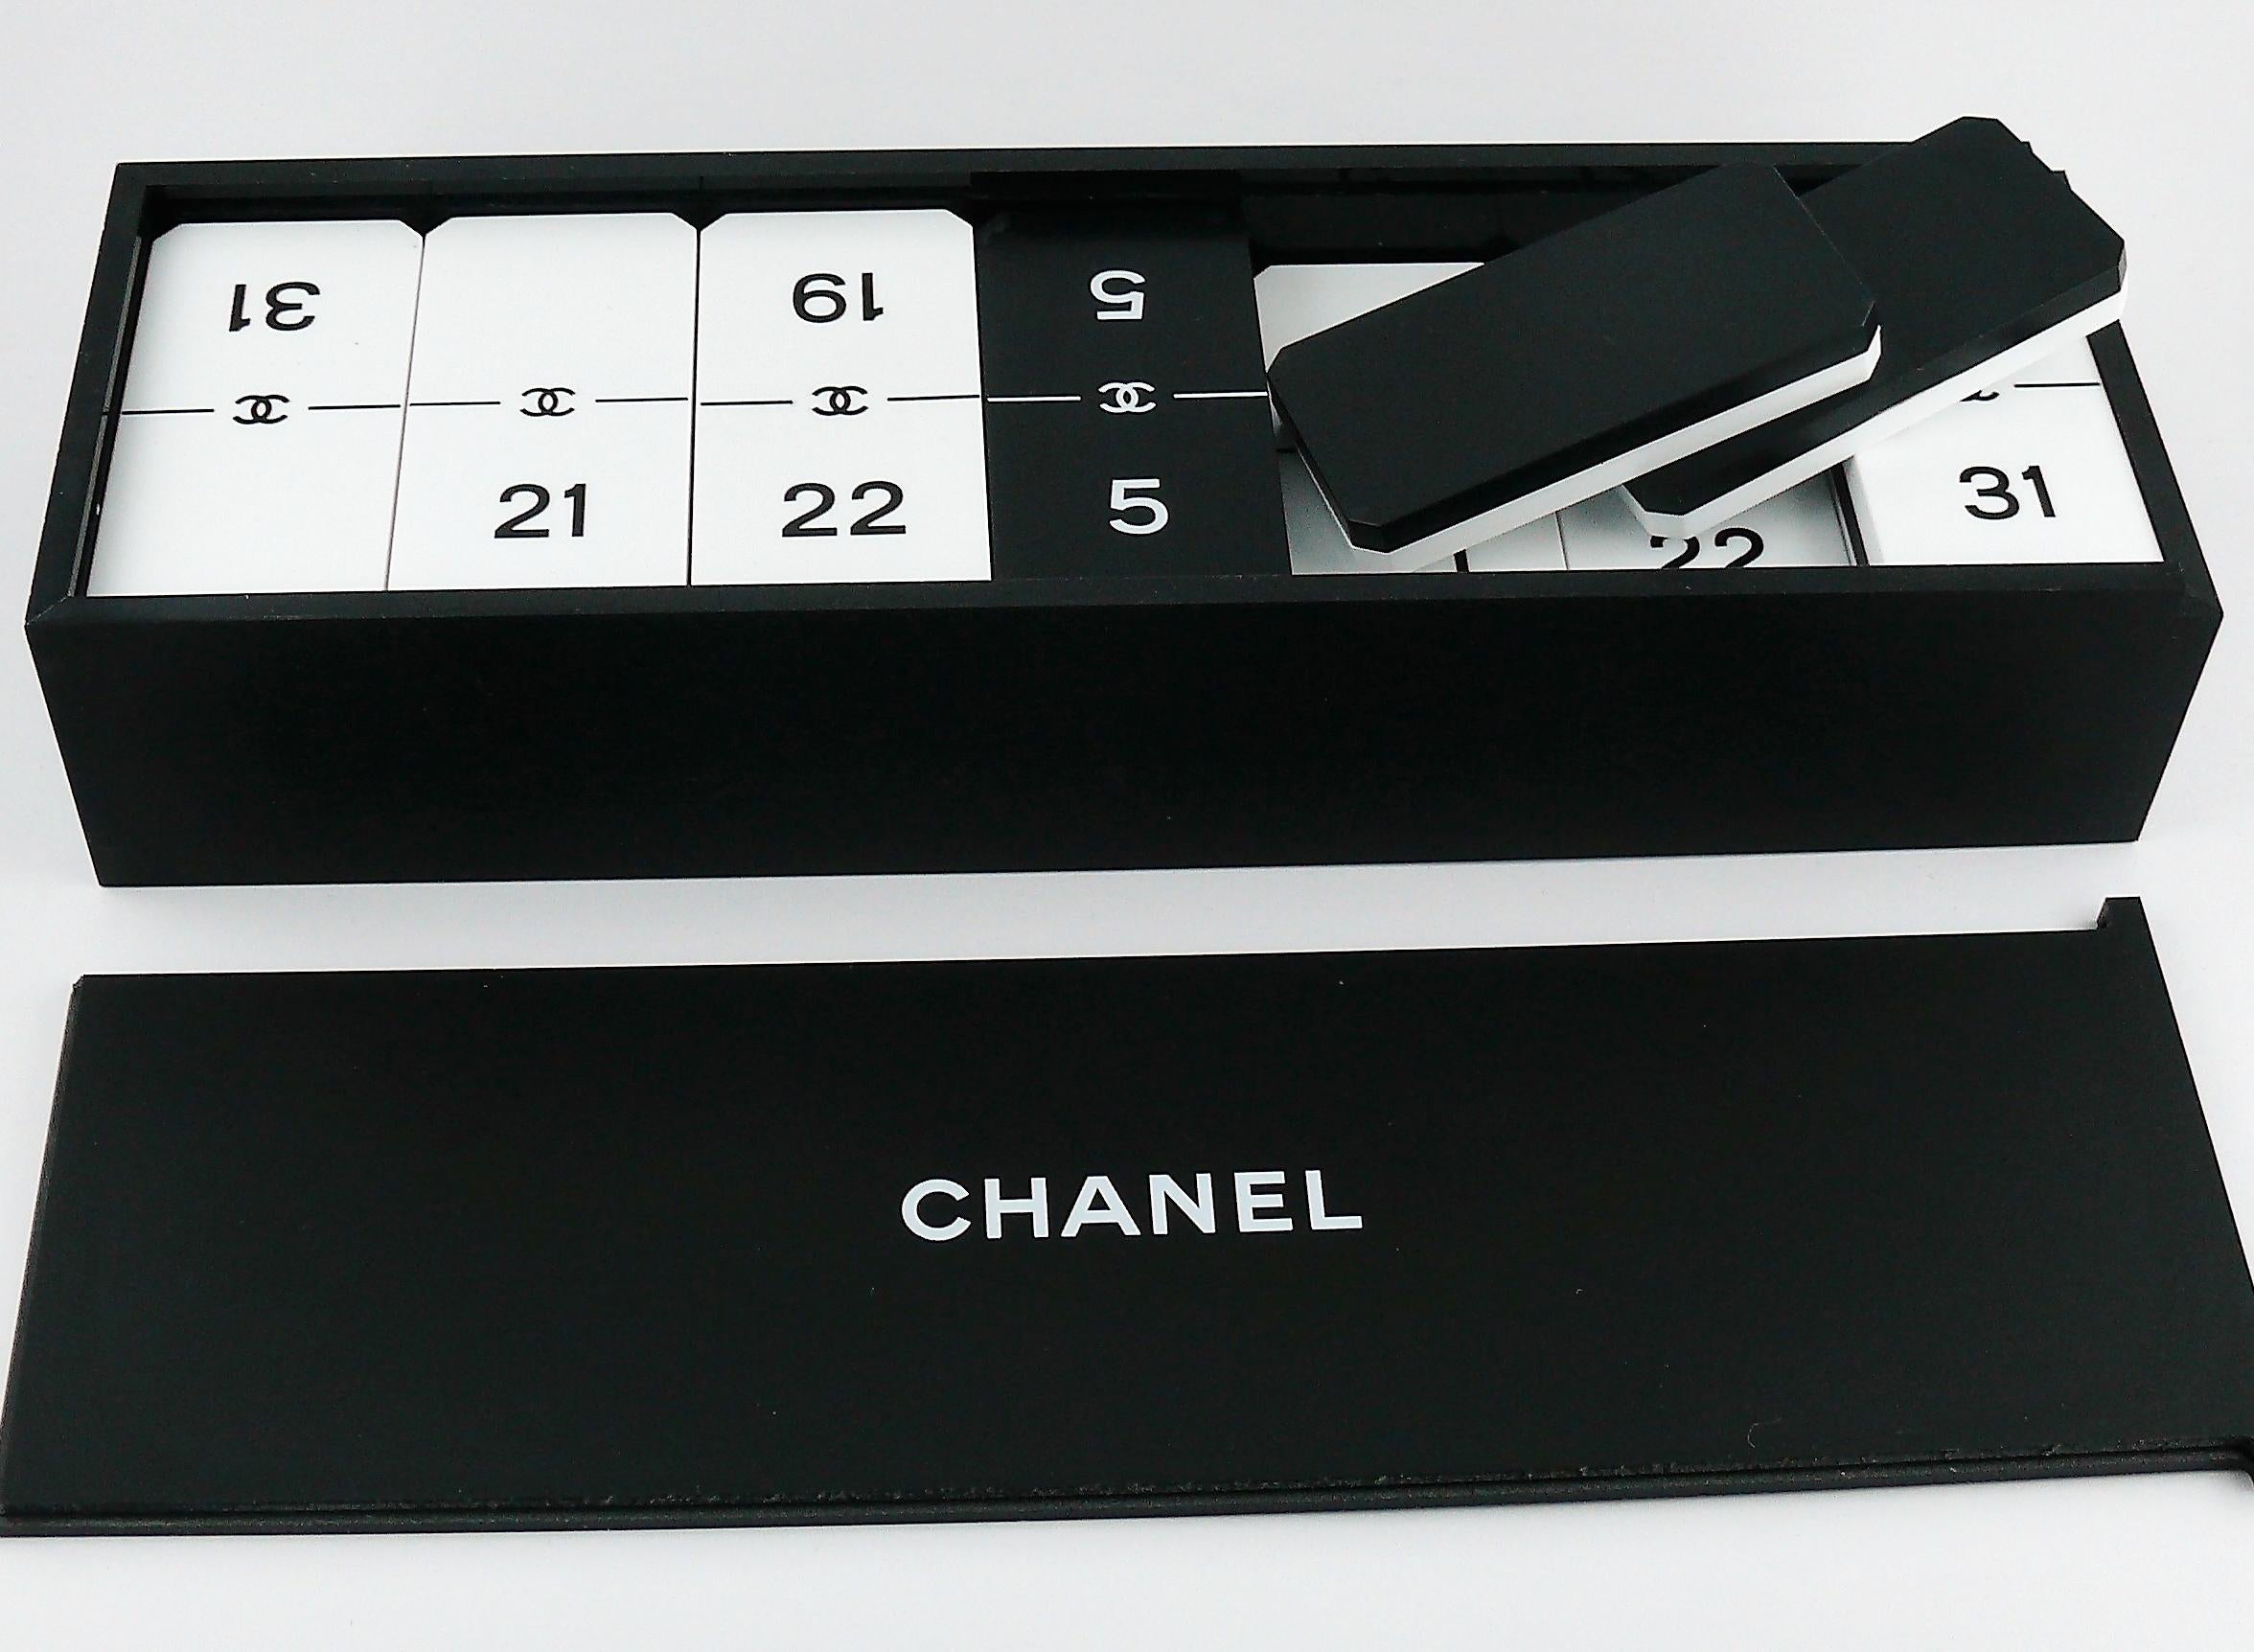 CHANEL promotional gift domino set.

Deck of 28 pieces (27 white and 1 black) with CHANEL CC logo in a matching hard case.

Please that this is not not a retail item.

Comes with original cardboard packaging box (used condition / see photos 5 to